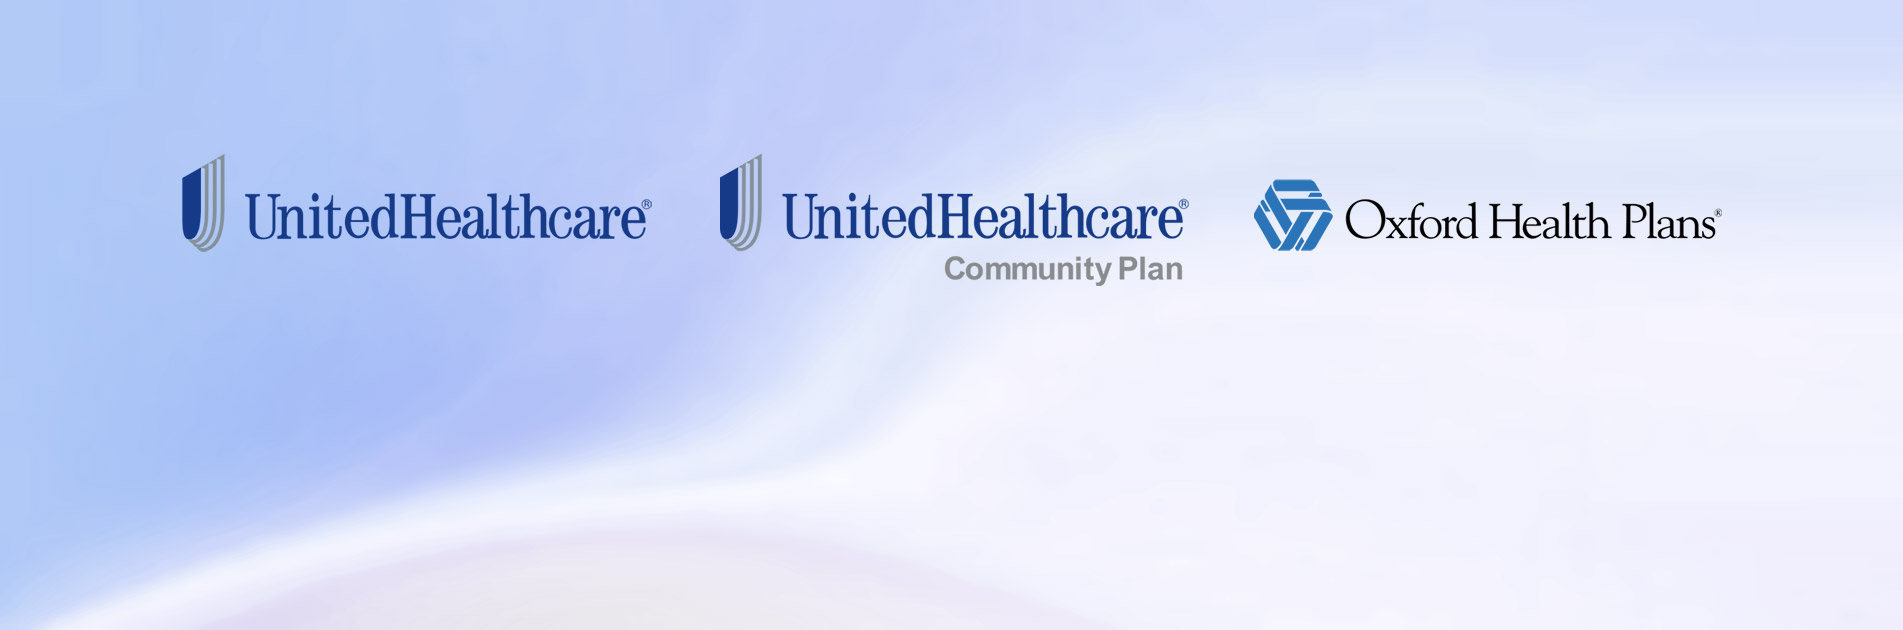 Lenco has been selected as a national, in-network lab provider for UnitedHealthcare, UnitedHealthcare Community Plan, Oxford Health Plans